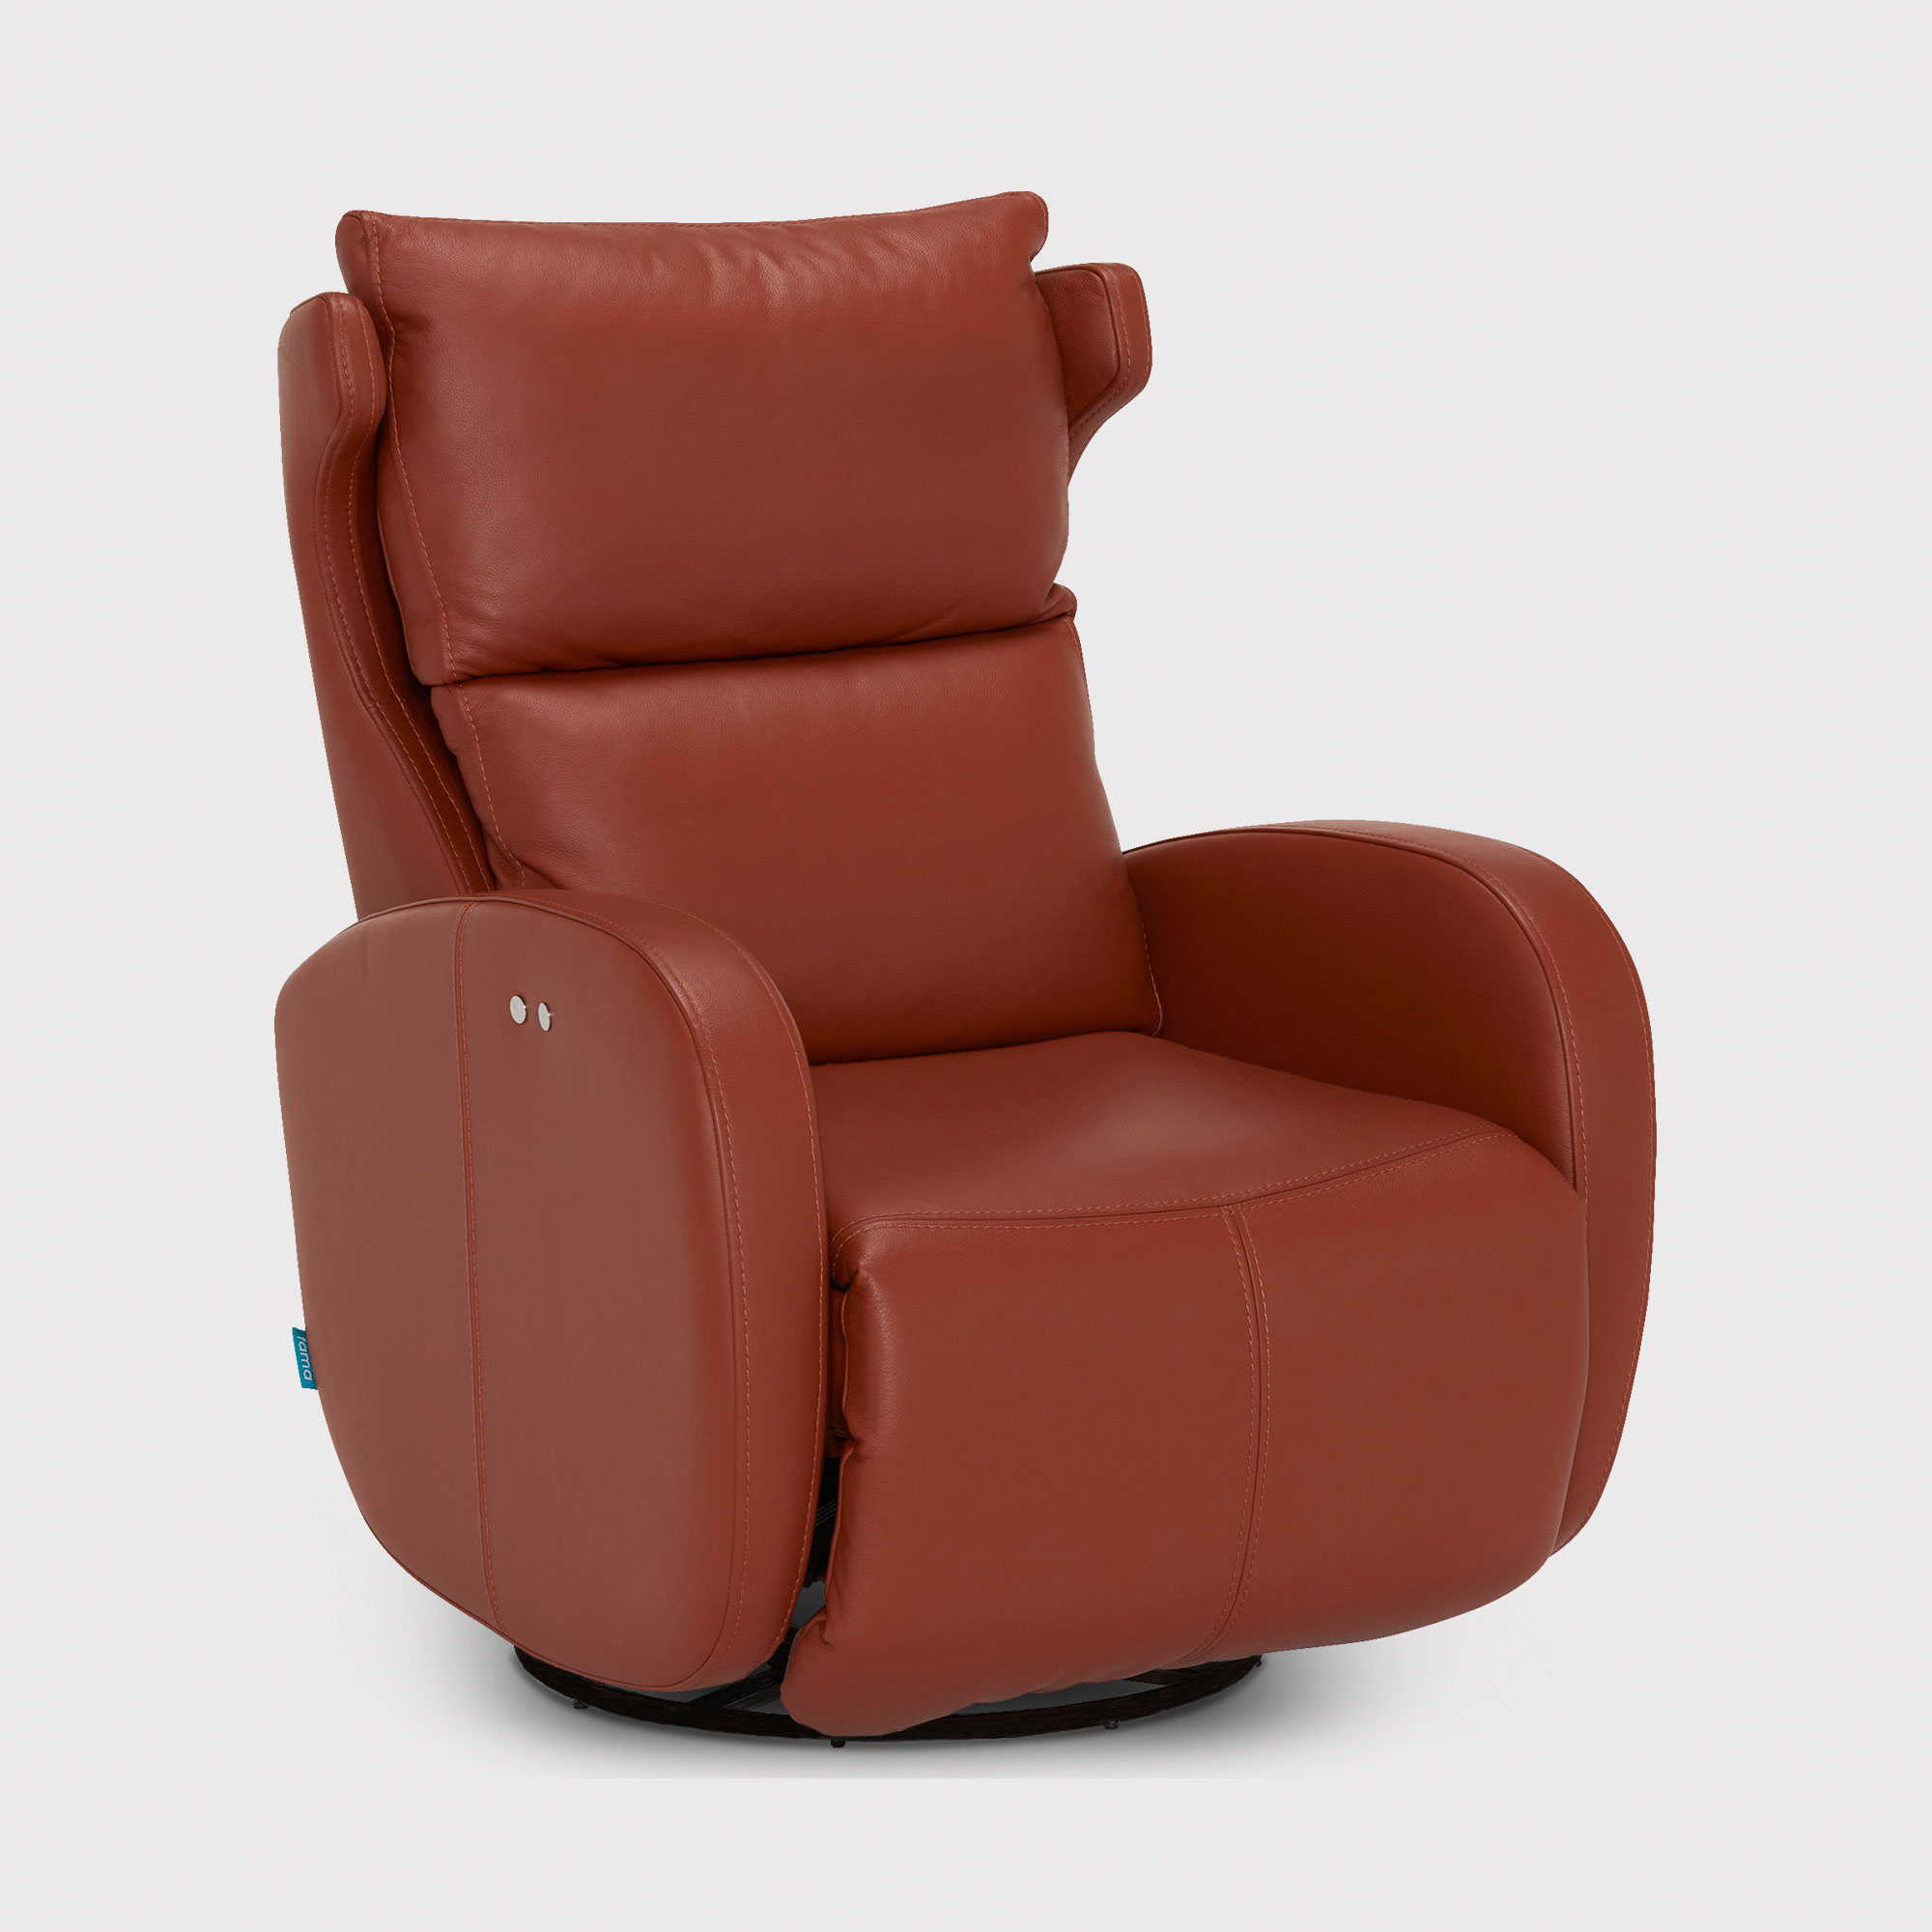 Ibiza Electric Recliner, Brown Fabric | Barker & Stonehouse